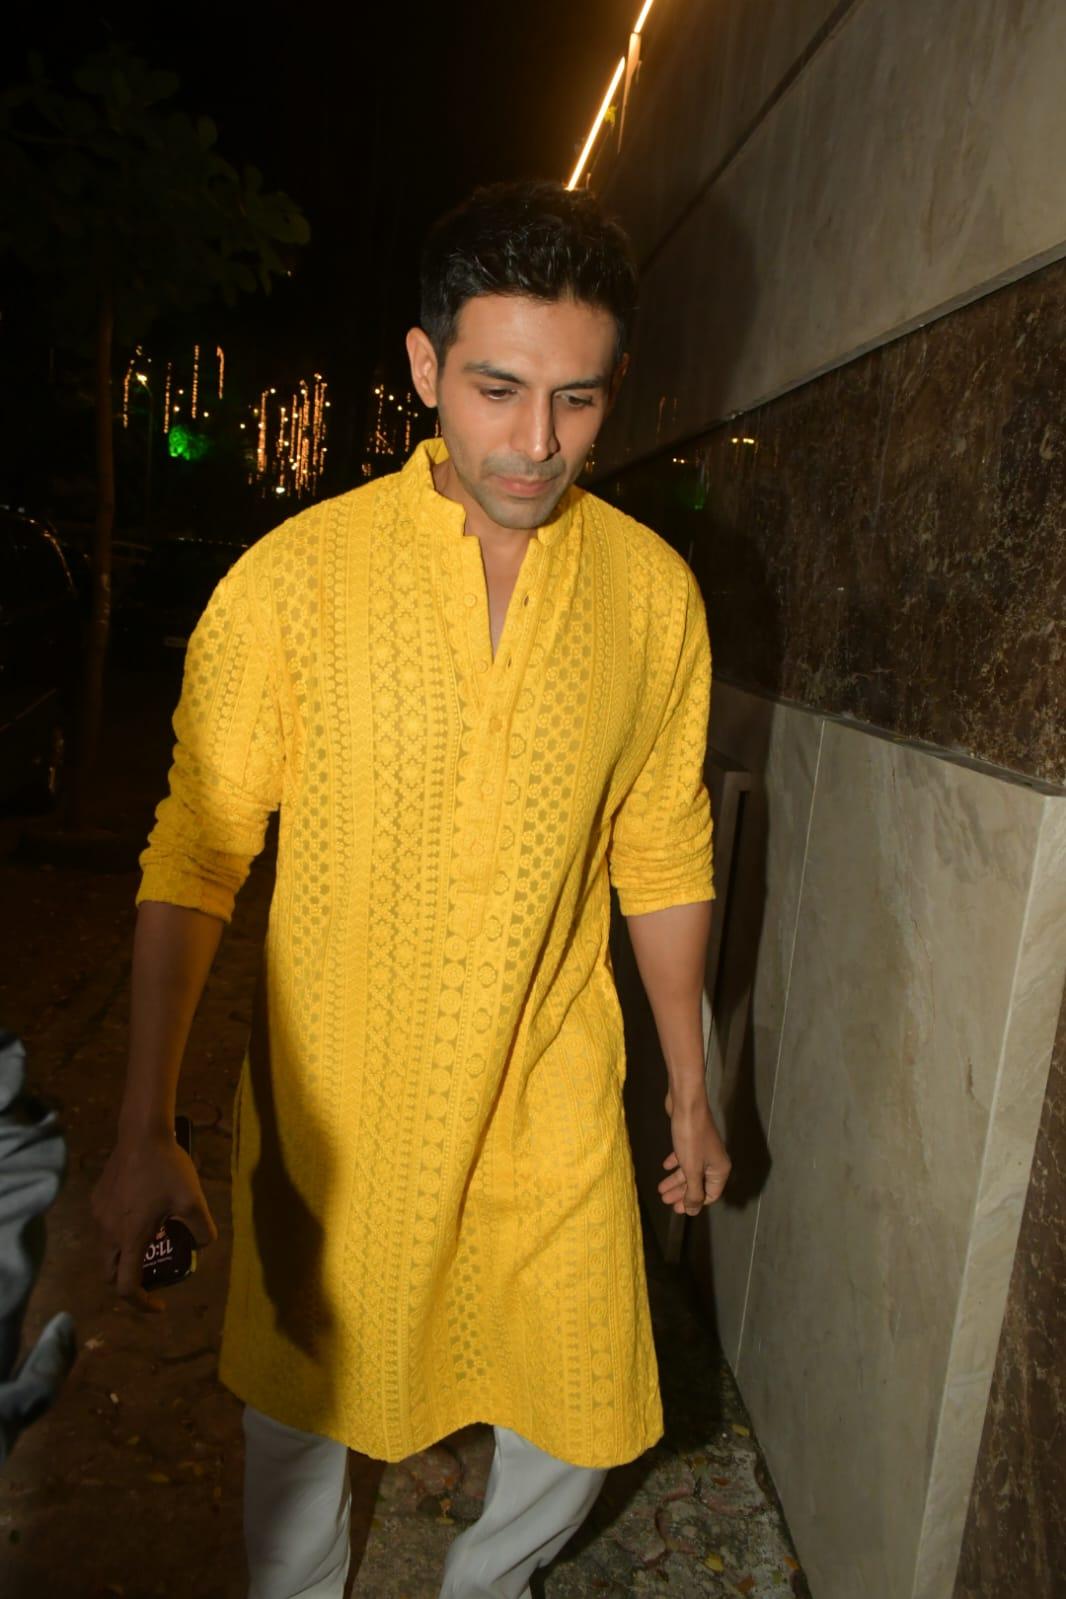 The actor looked dashing in a resplendent yellow kurta